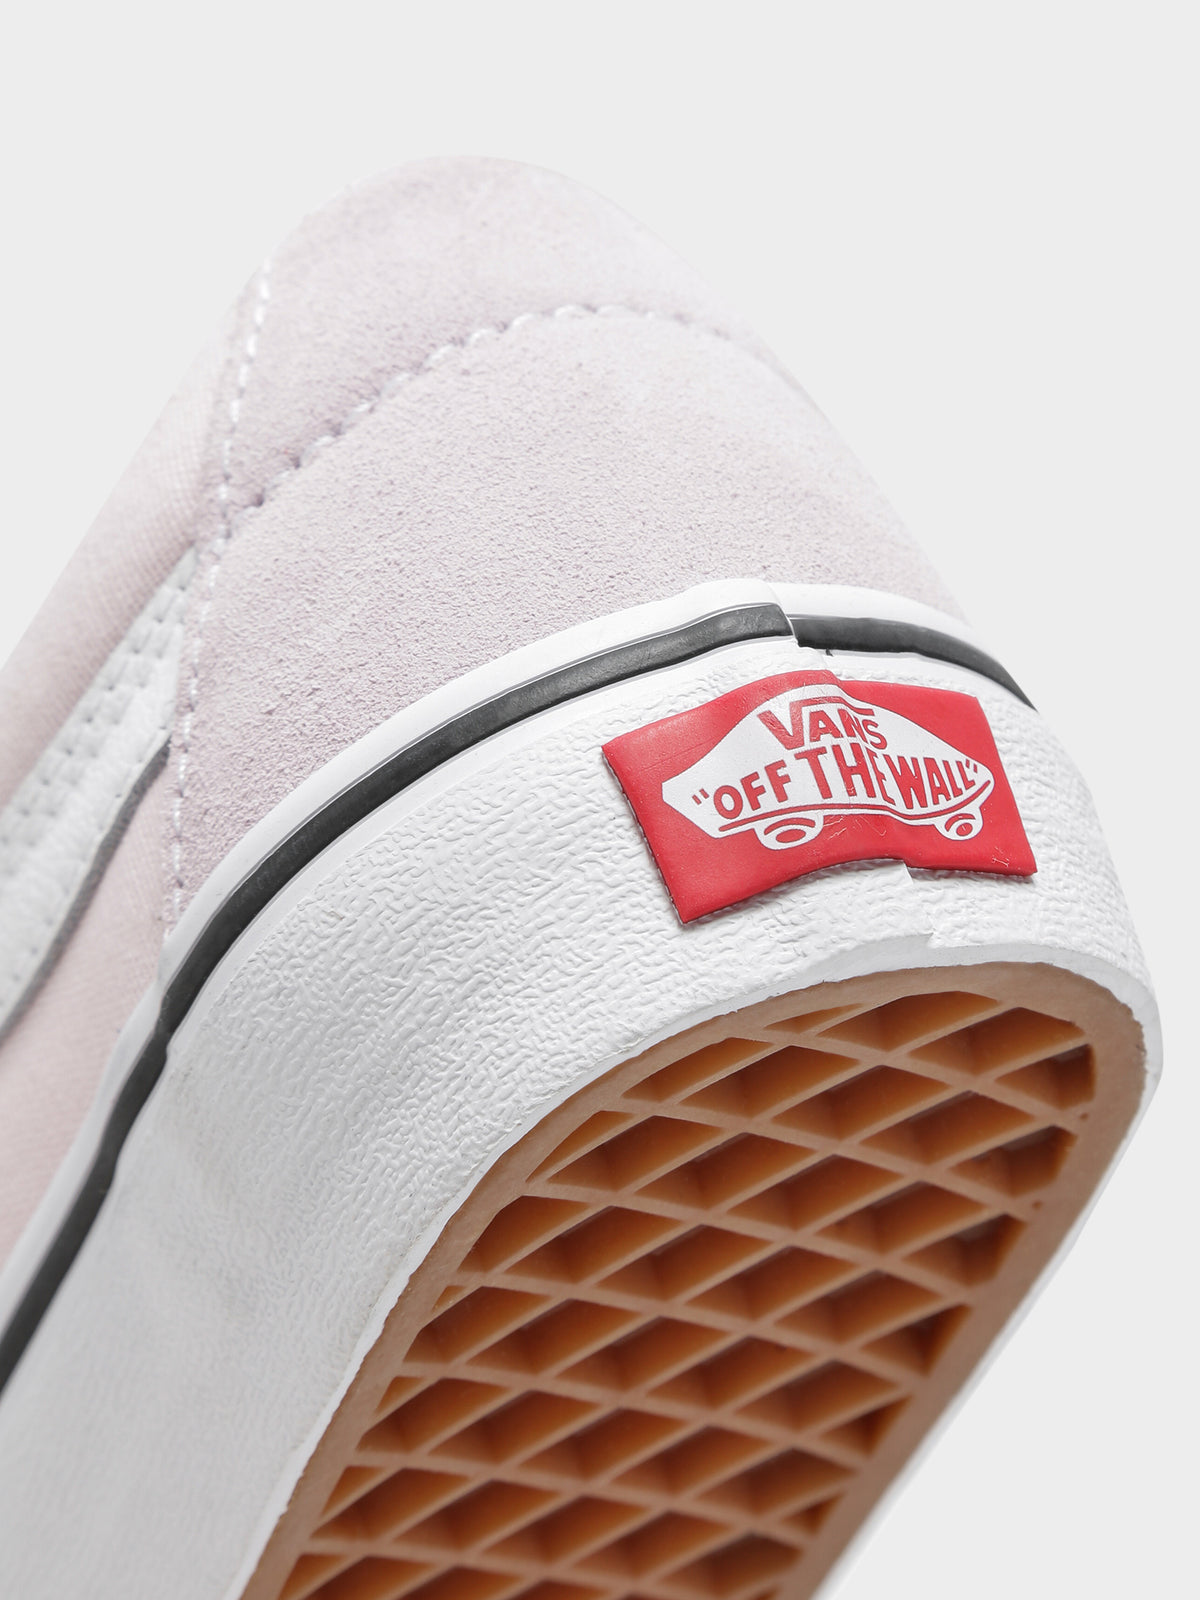 Womens Sk8 Lo Sneakers in Orchid Pink